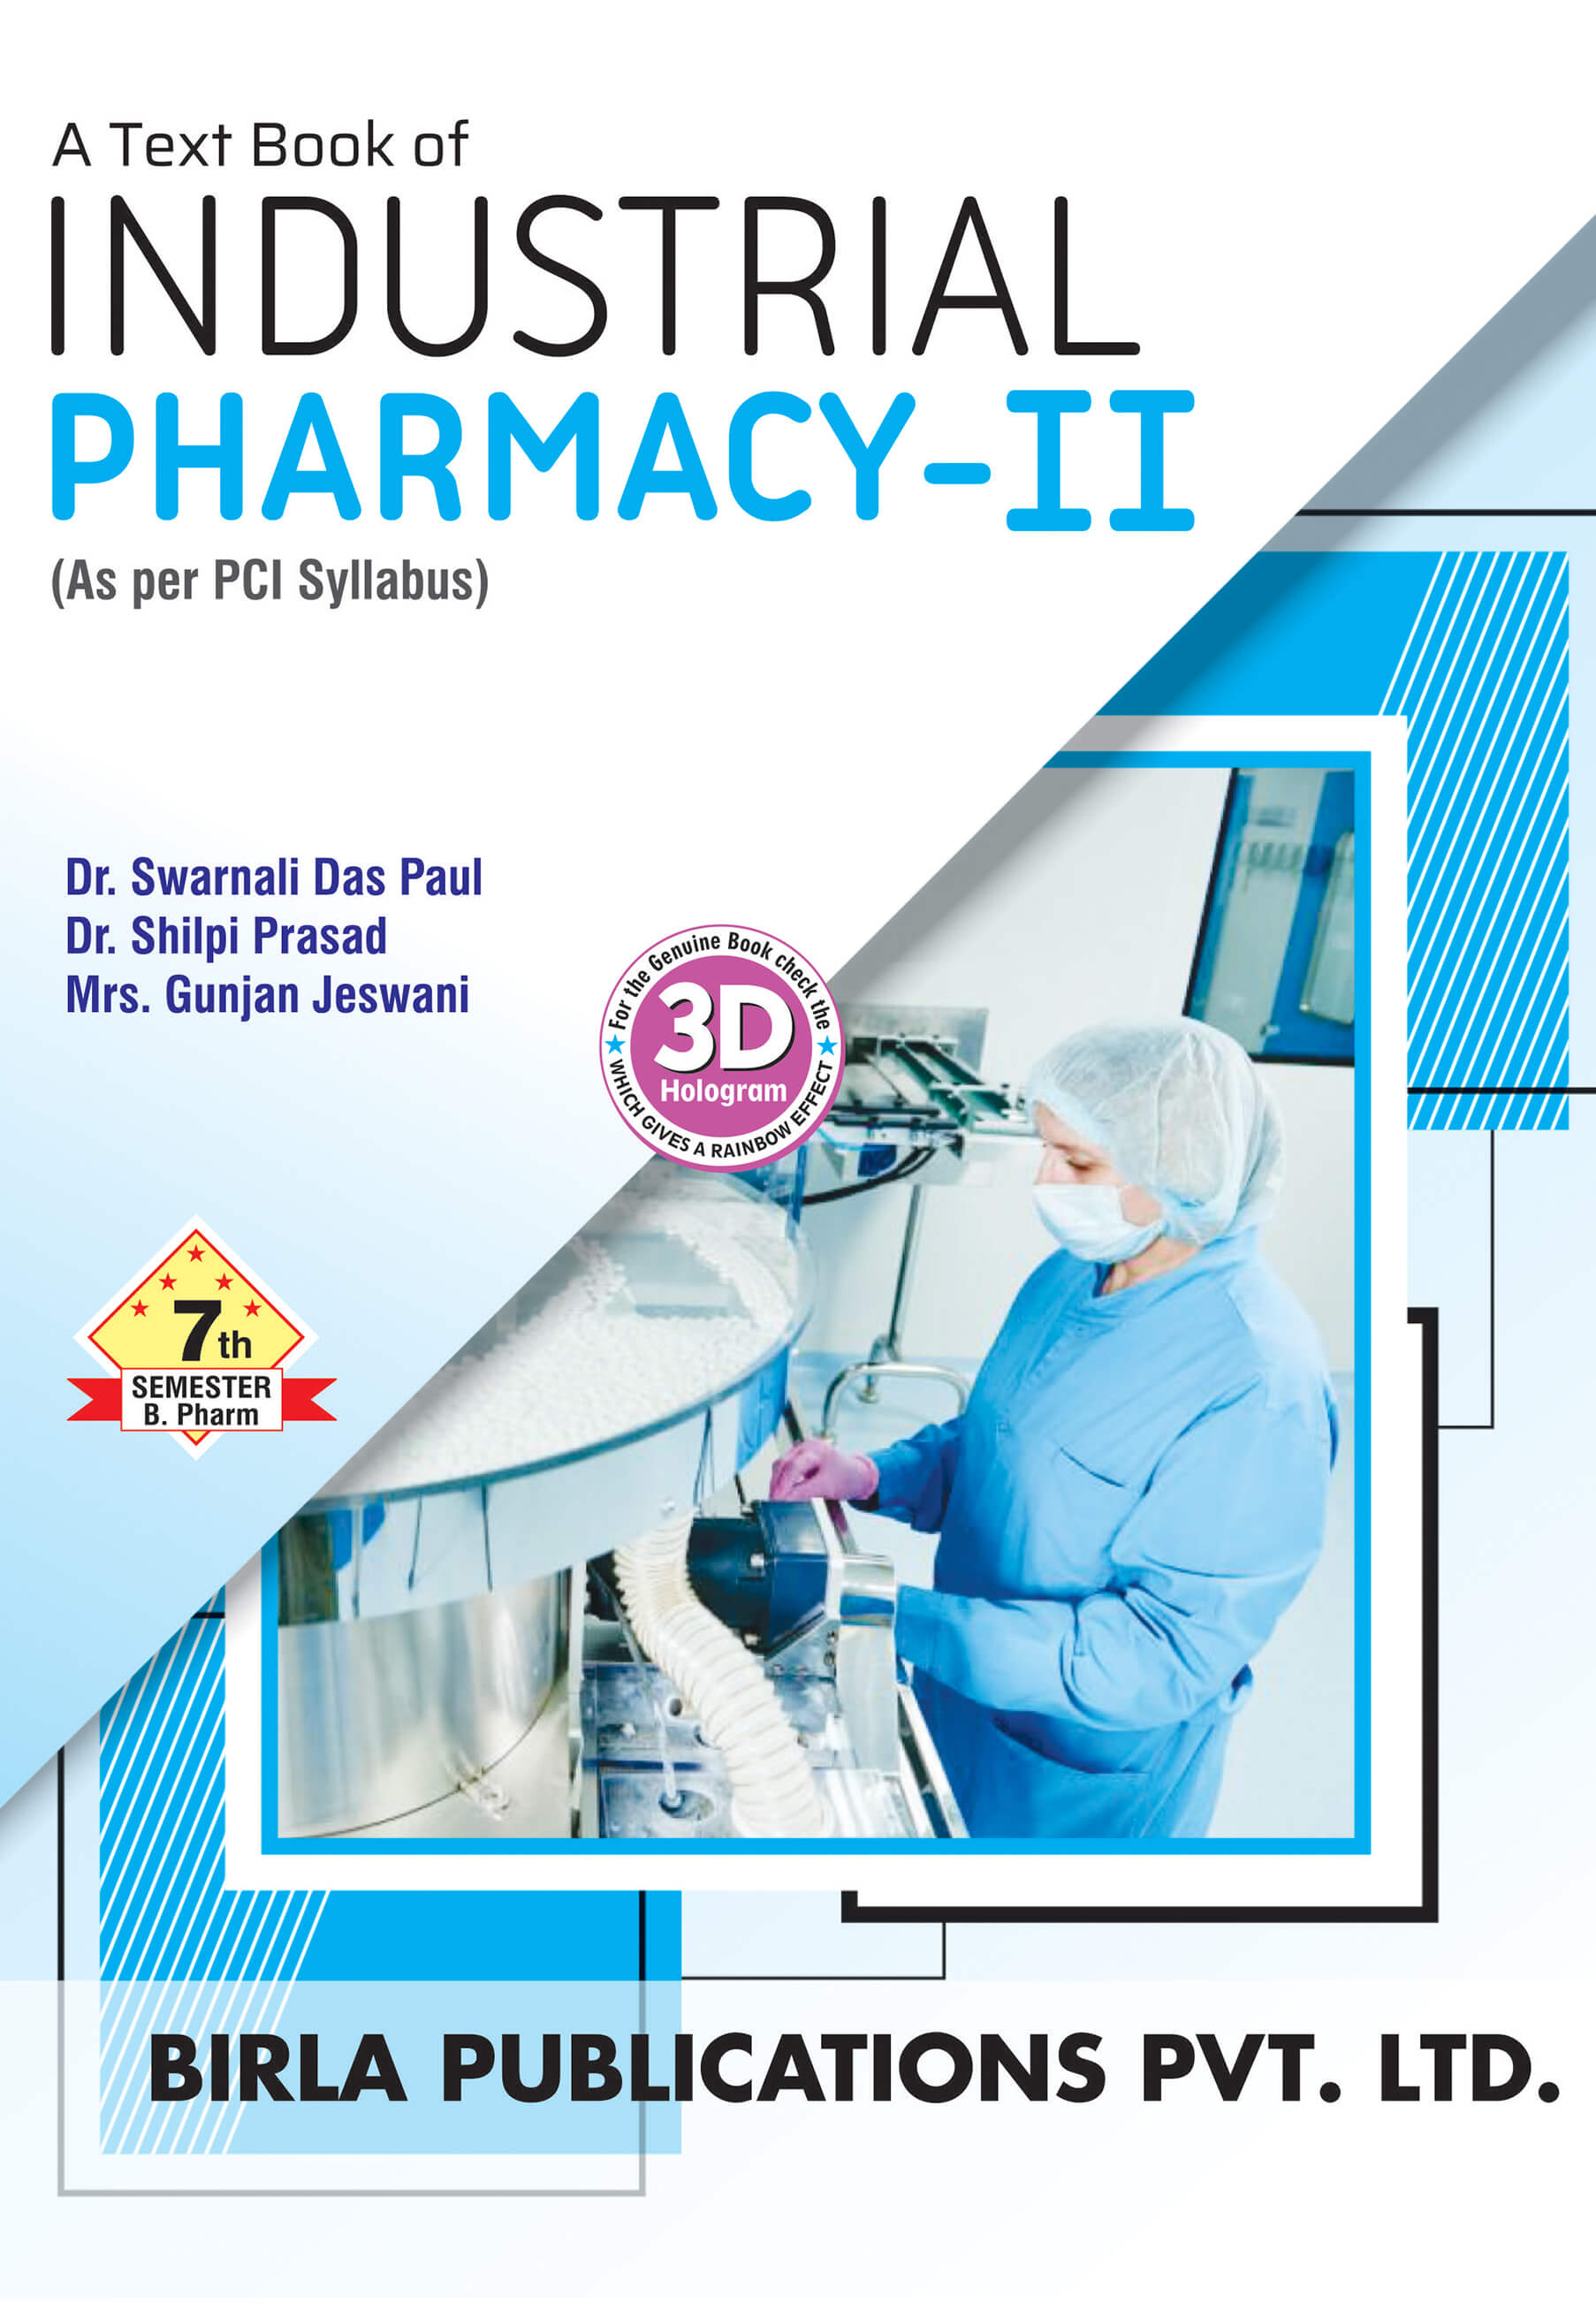 A TEXT BOOK OF INDUSTRIAL PHARMACY-II